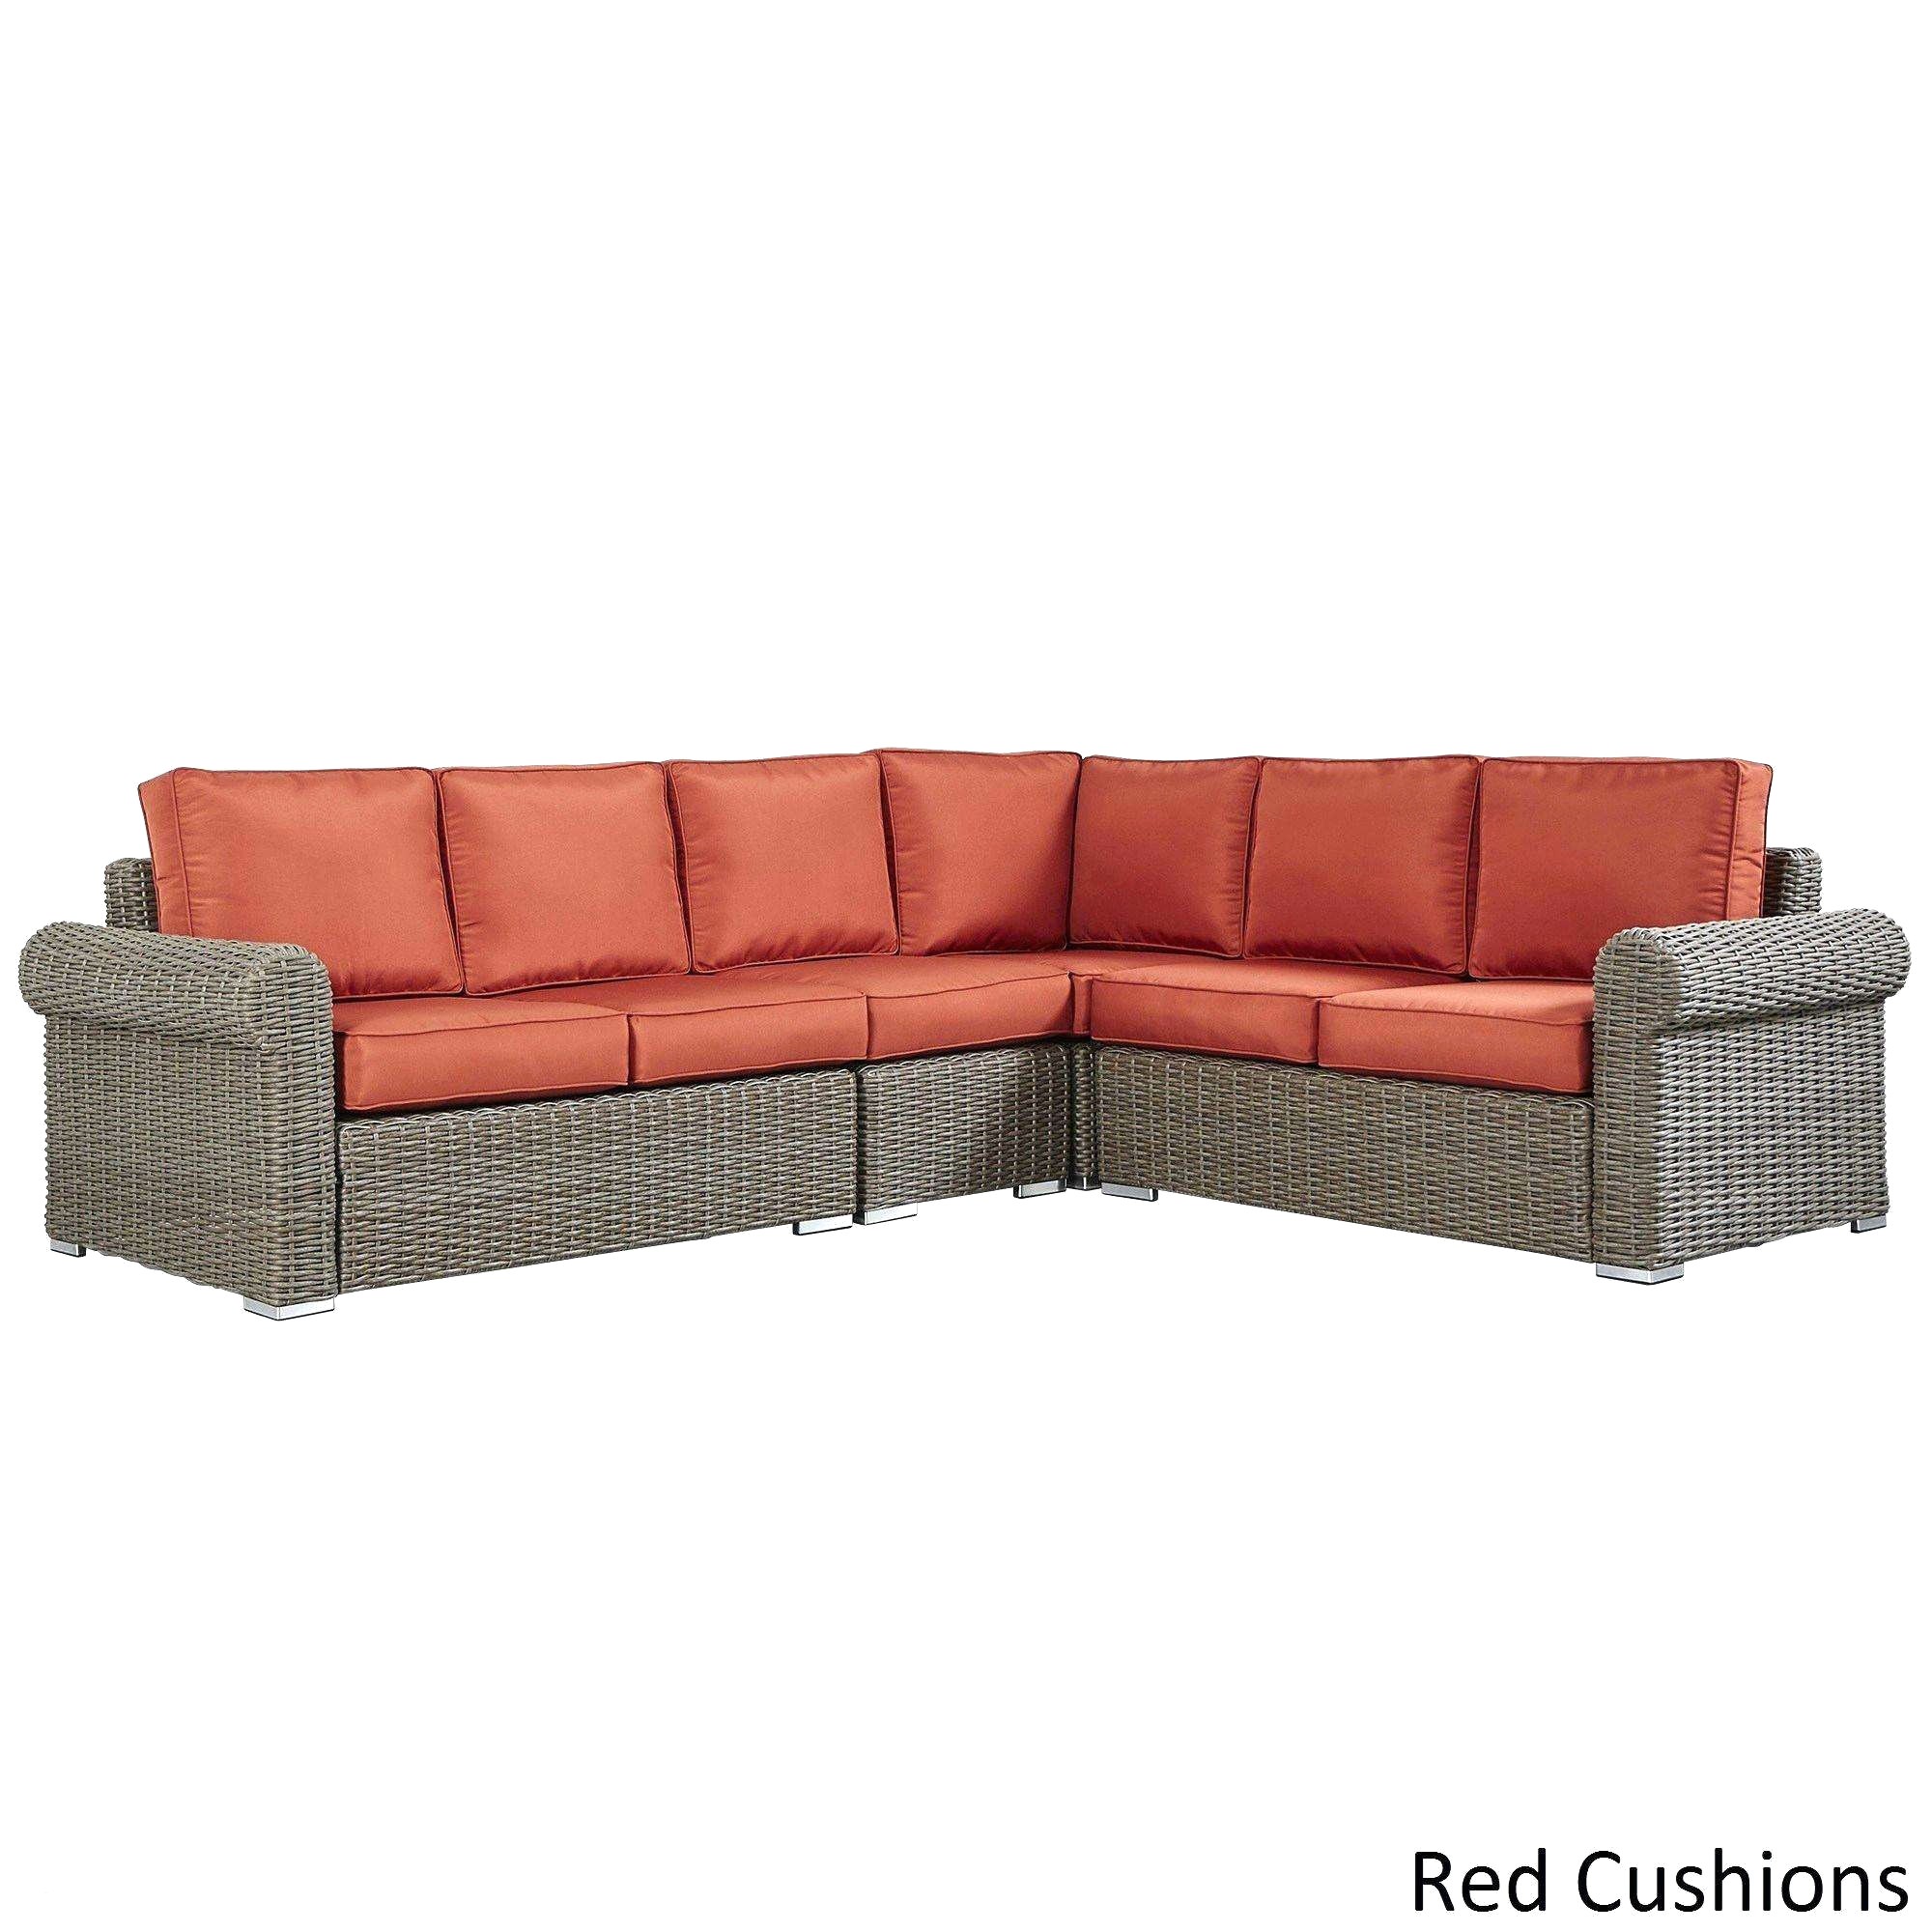 patio couches elegant patio cushion slipcovers awesome wicker outdoor sofa 0d patio chairs